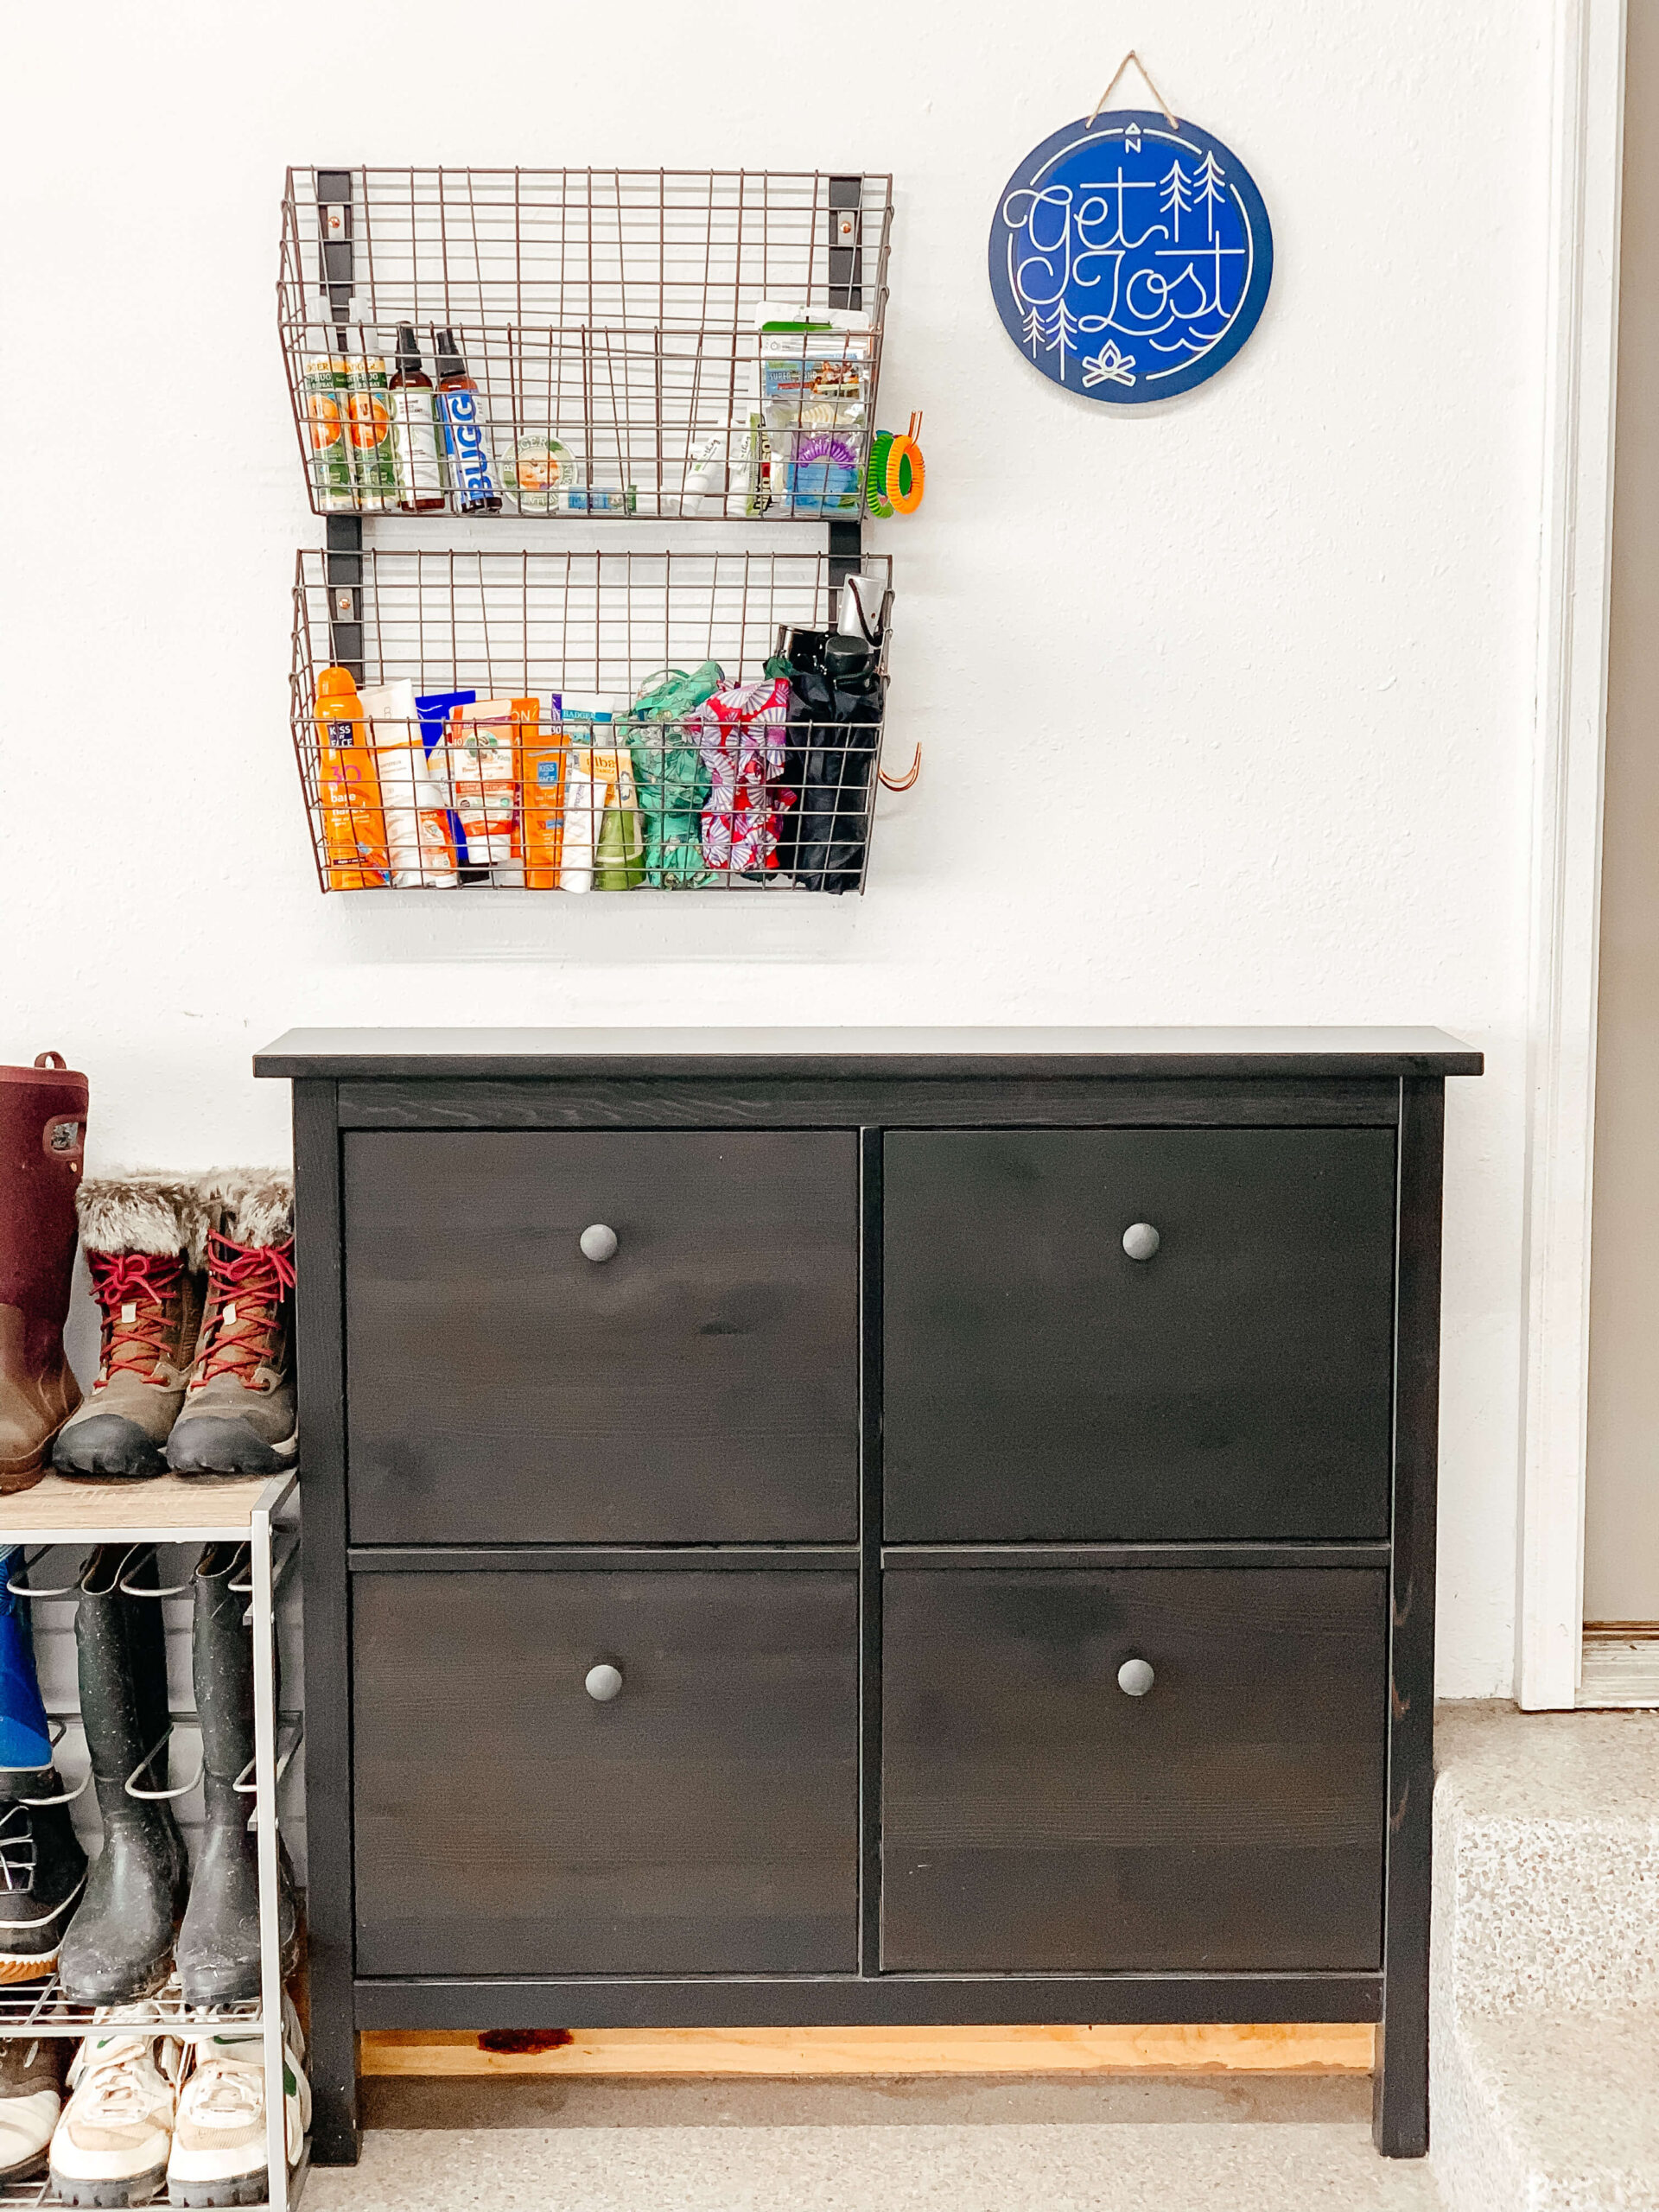 Try these garage storage ideas and organize clutter much easier. These organizing hacks will help you to keep everything neat and clean. Annie Johnson | Design Love Life